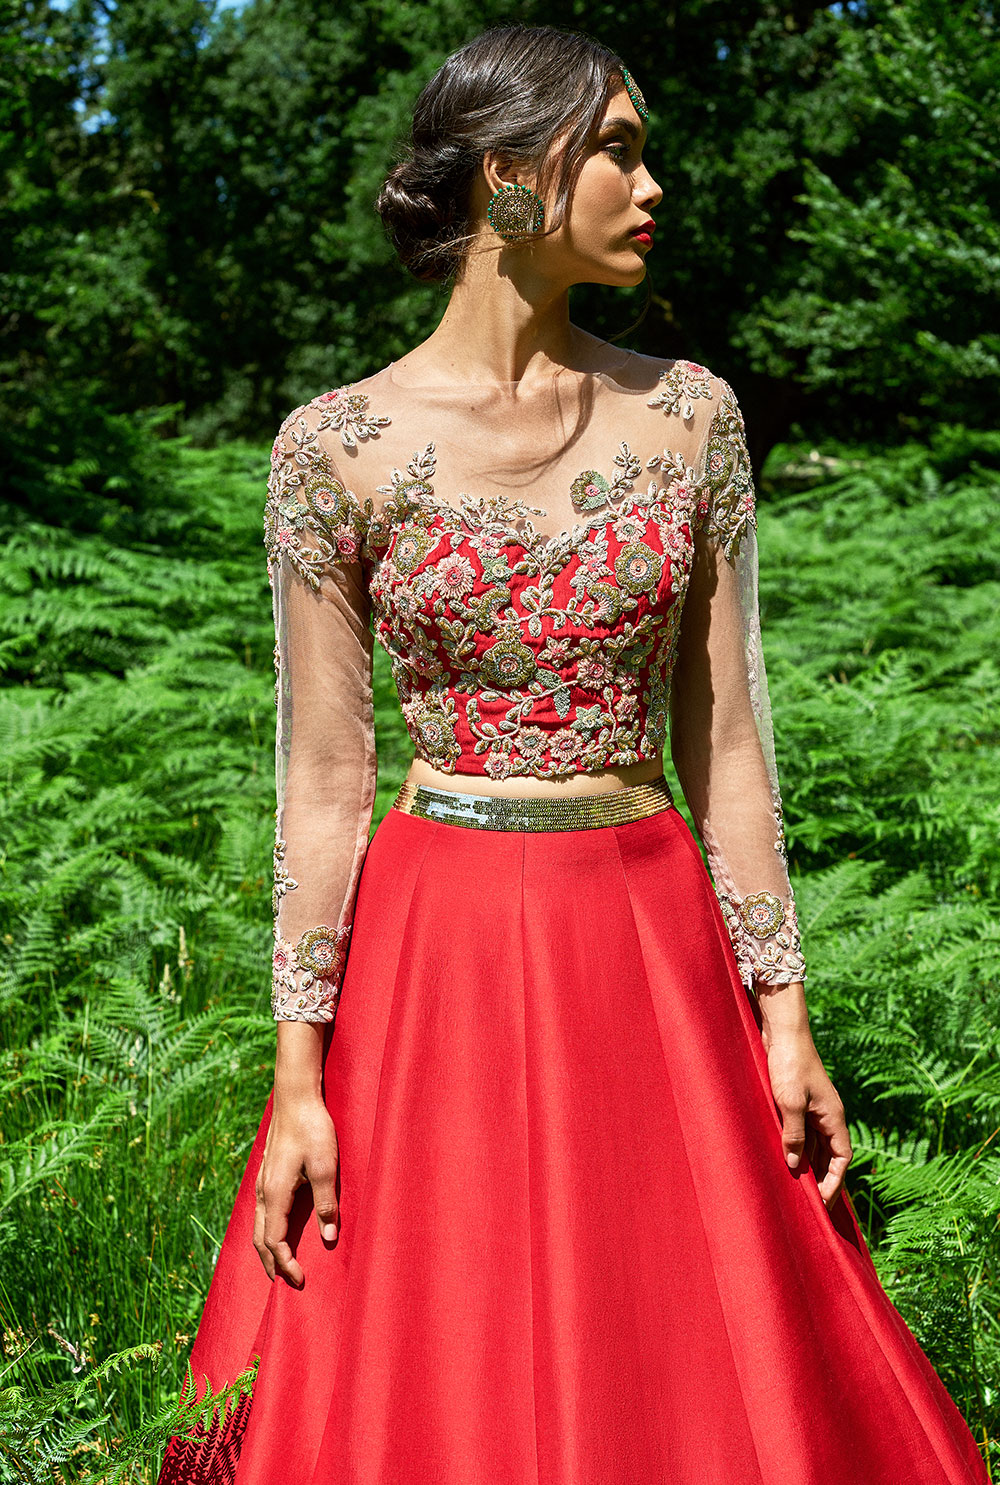 Bride wearing a red bridal lehenga with embroidery and embellishments